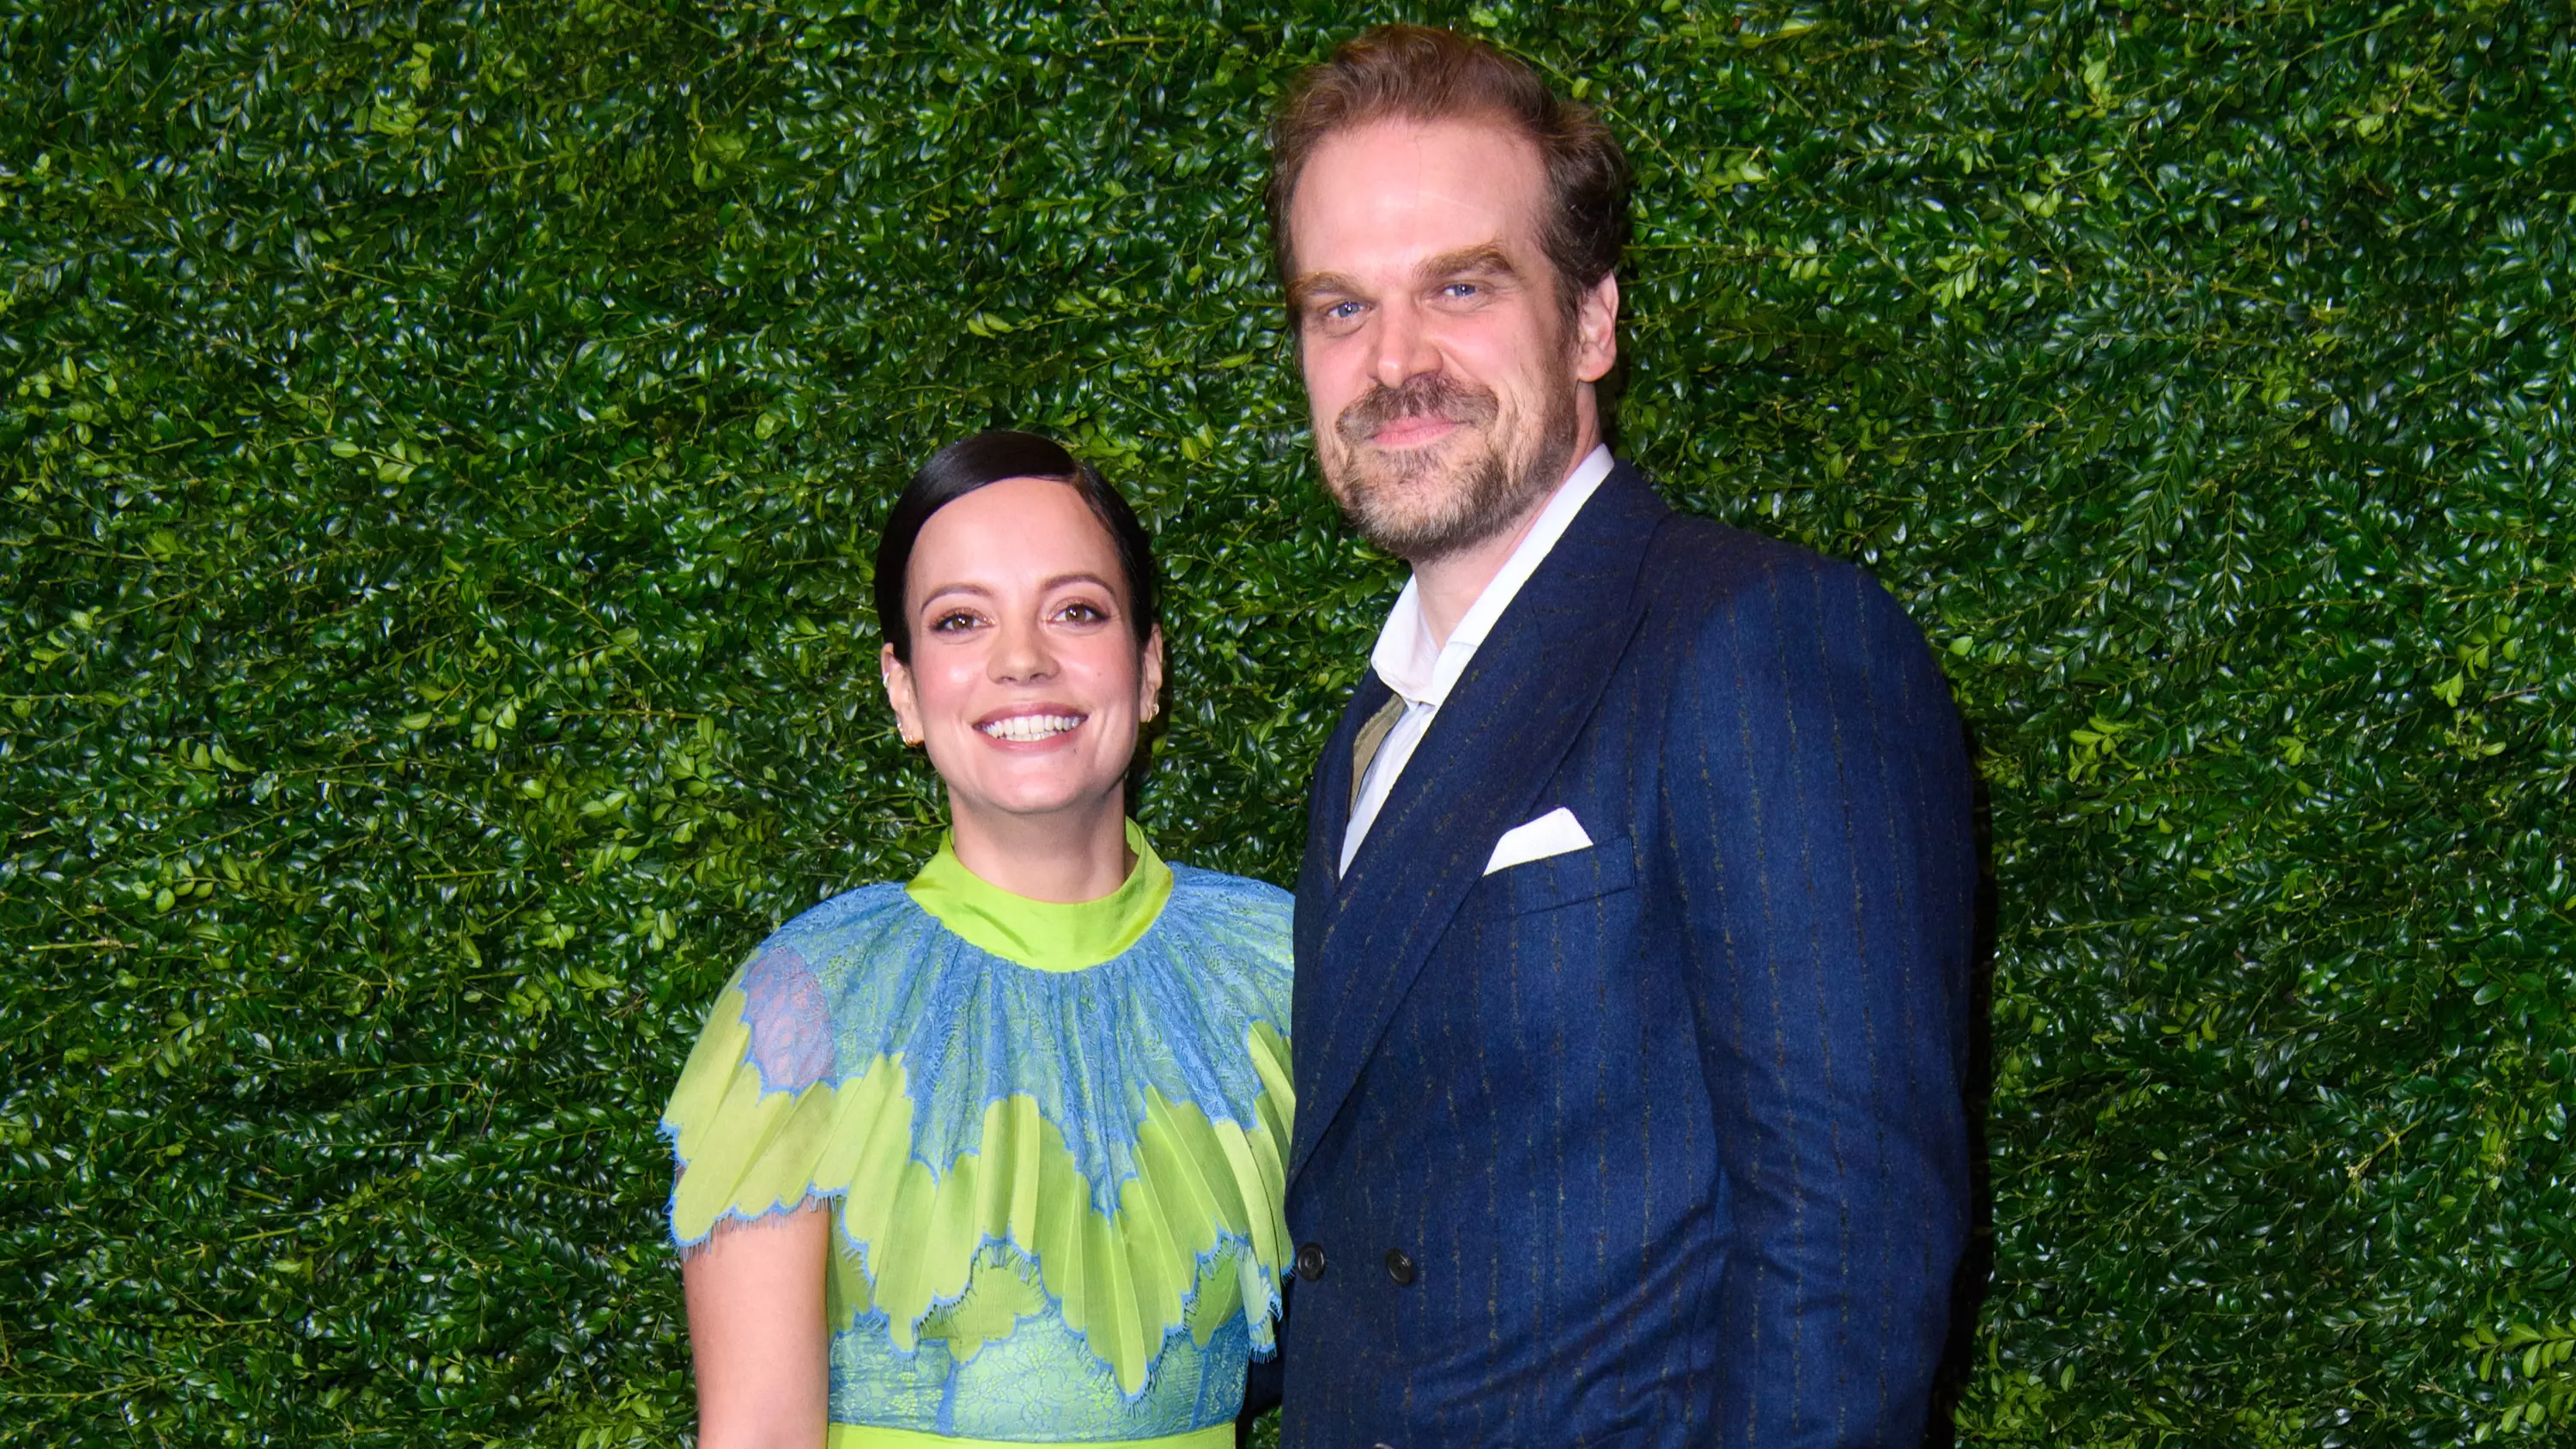 Lily Allen Confirms She's Married 'Stranger Things' Star David Harbour With Wedding Snaps